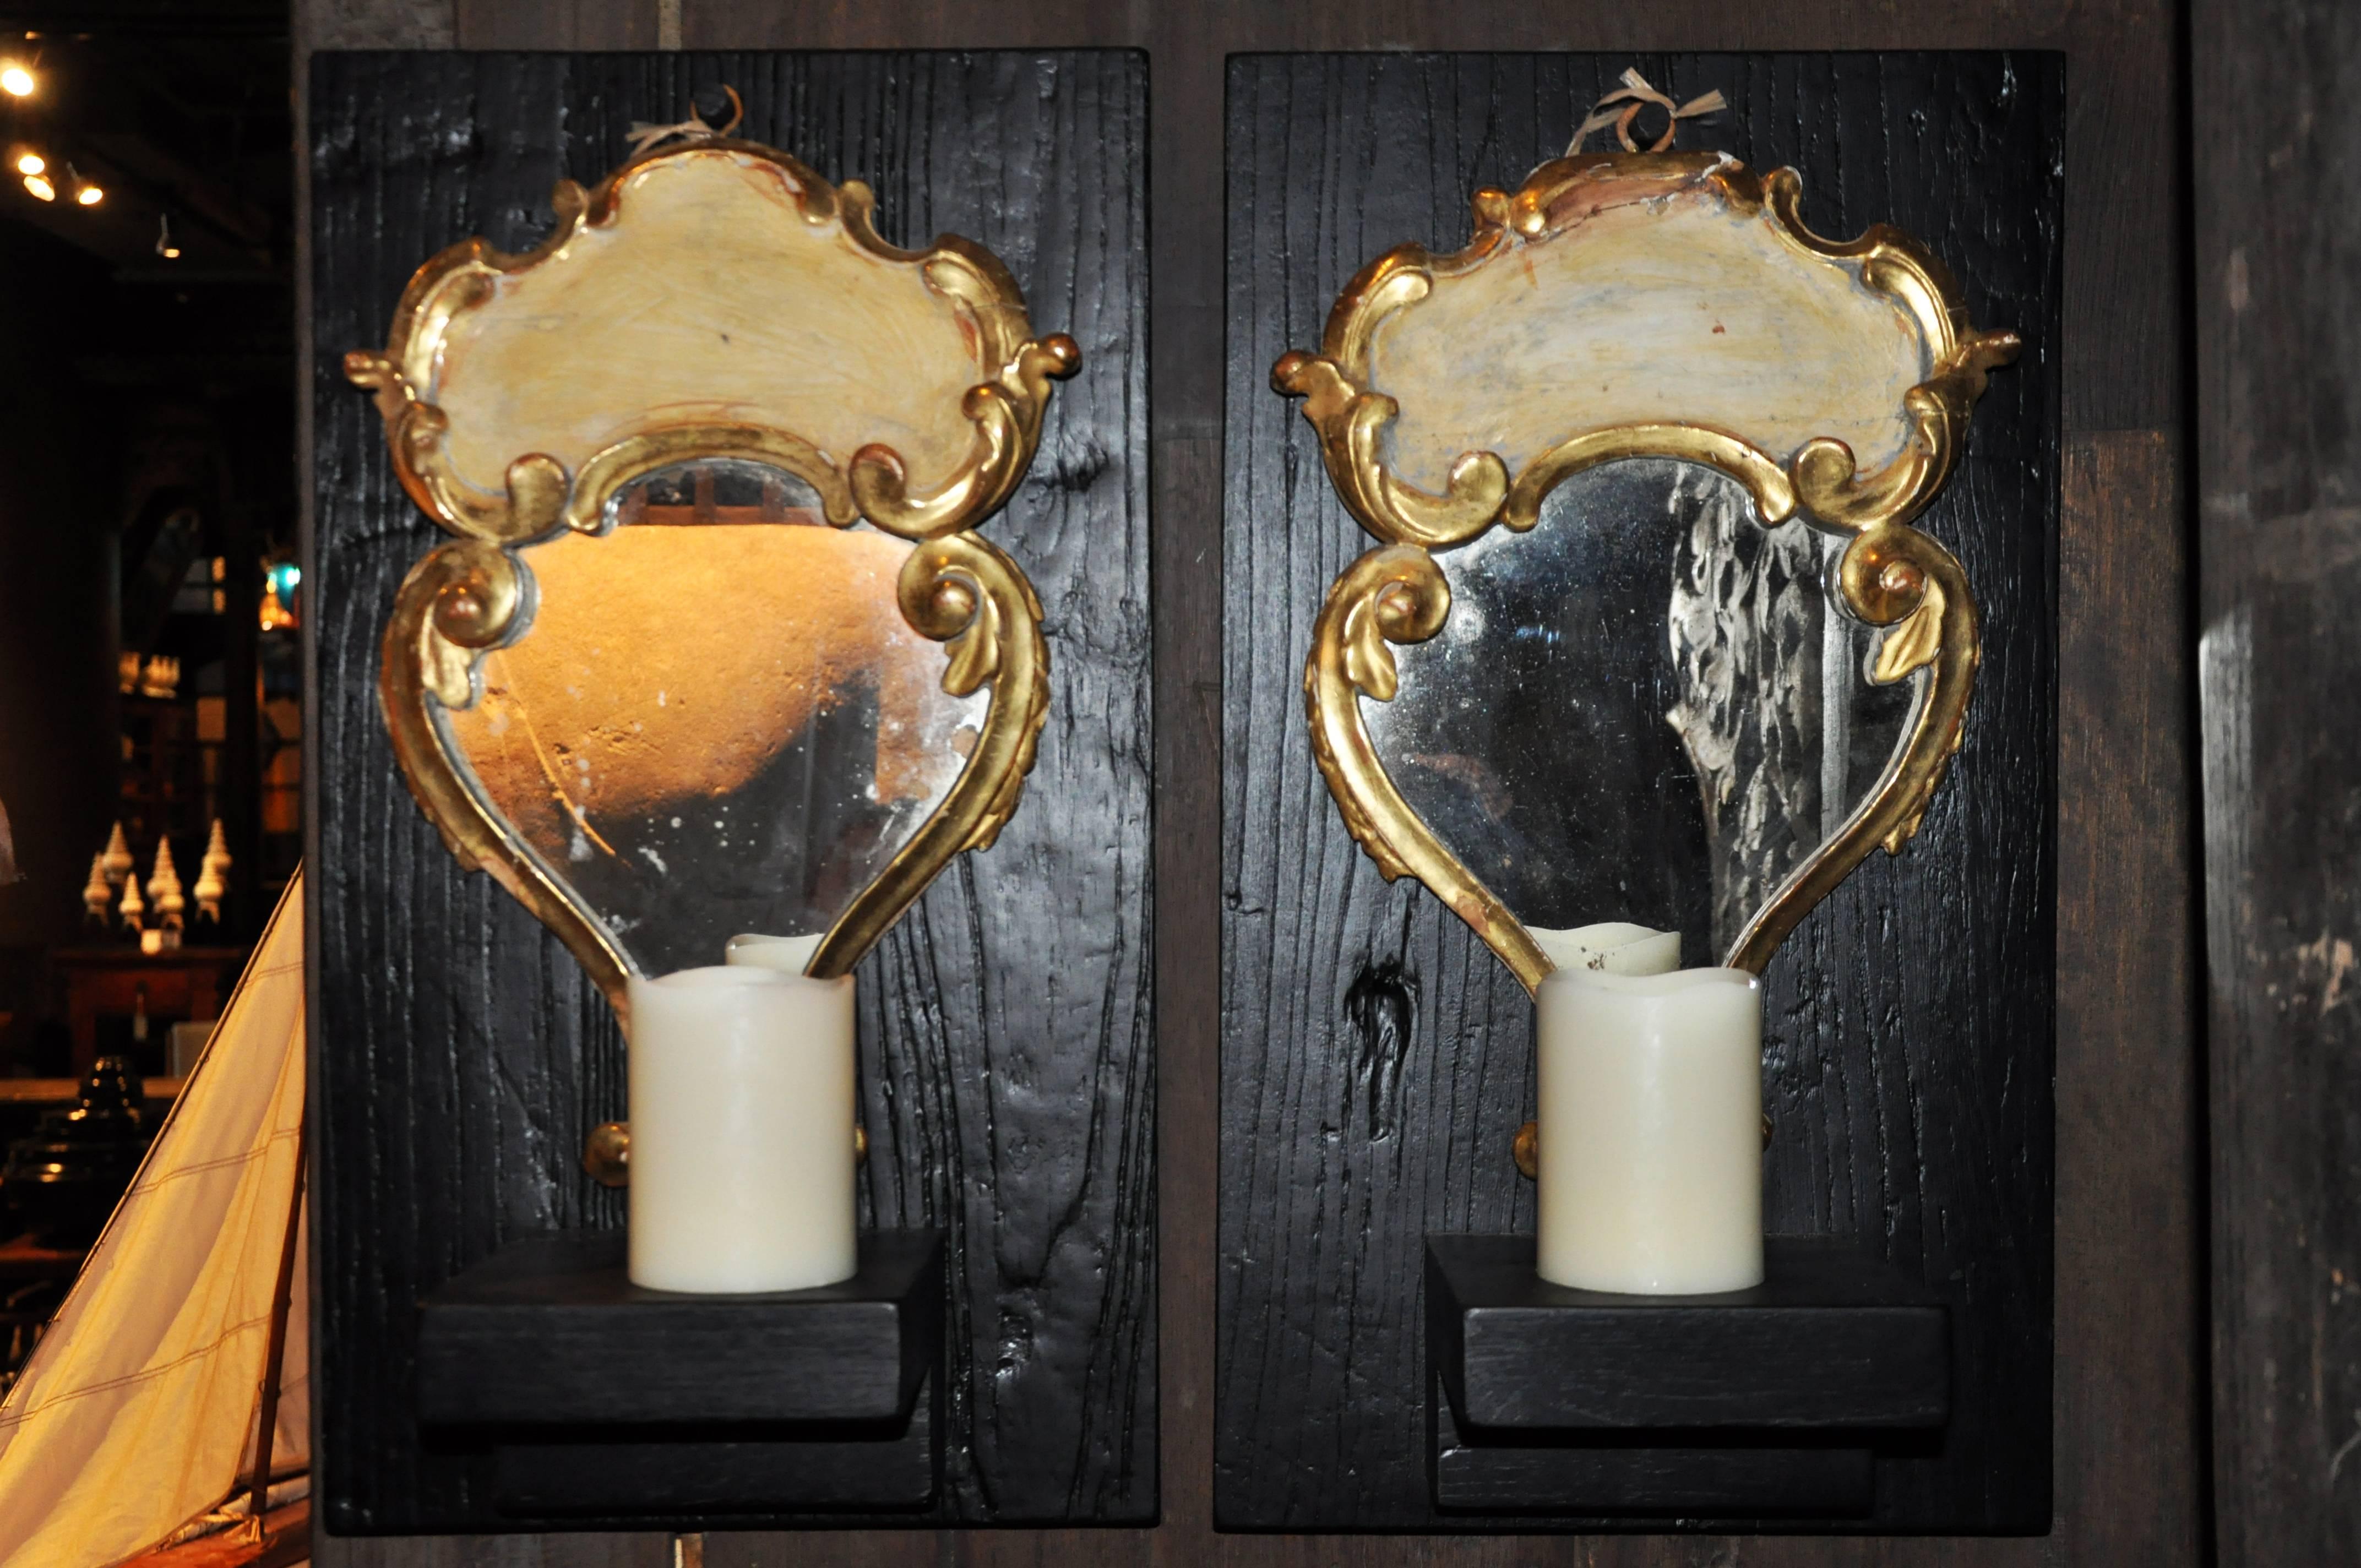 The acanthus leaf carved frames combine both S and C-scroll forms, which encircle the mirror plates as well as the shaped decorative panels that surmount them. The glass is original; however the delicate metal candle holders--which would have